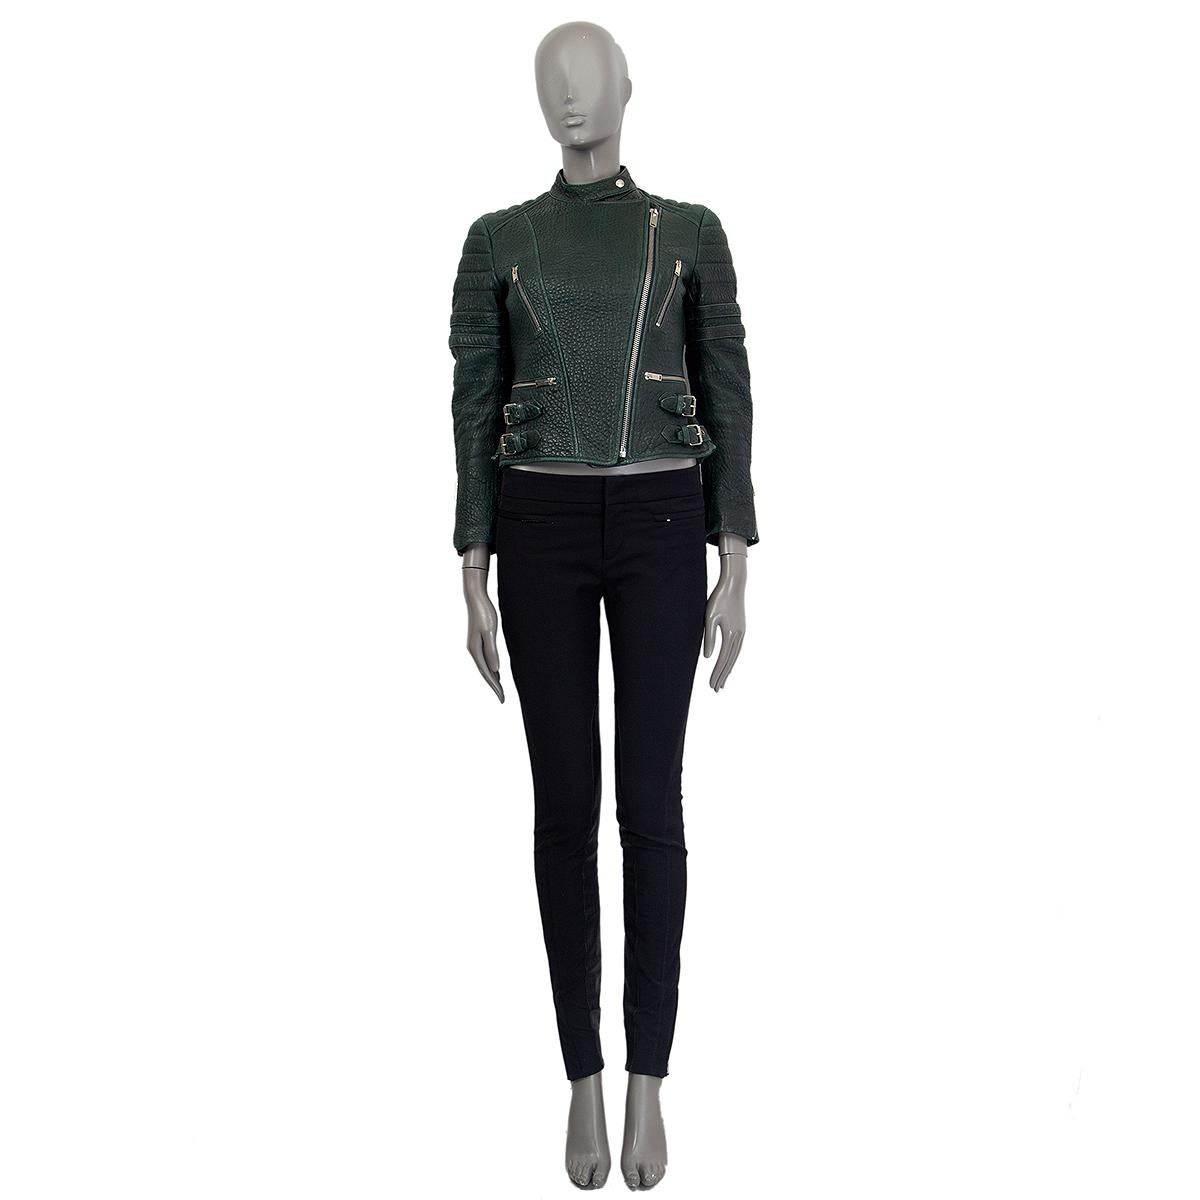 authentic Céline biker jacket in deep green lamb leather with four front zipper pockets and four side buckle details. Closes on the front with a zipper. Lined in viscose. Sings of worn out leather on right sleeve, otherwise it is in good condition.